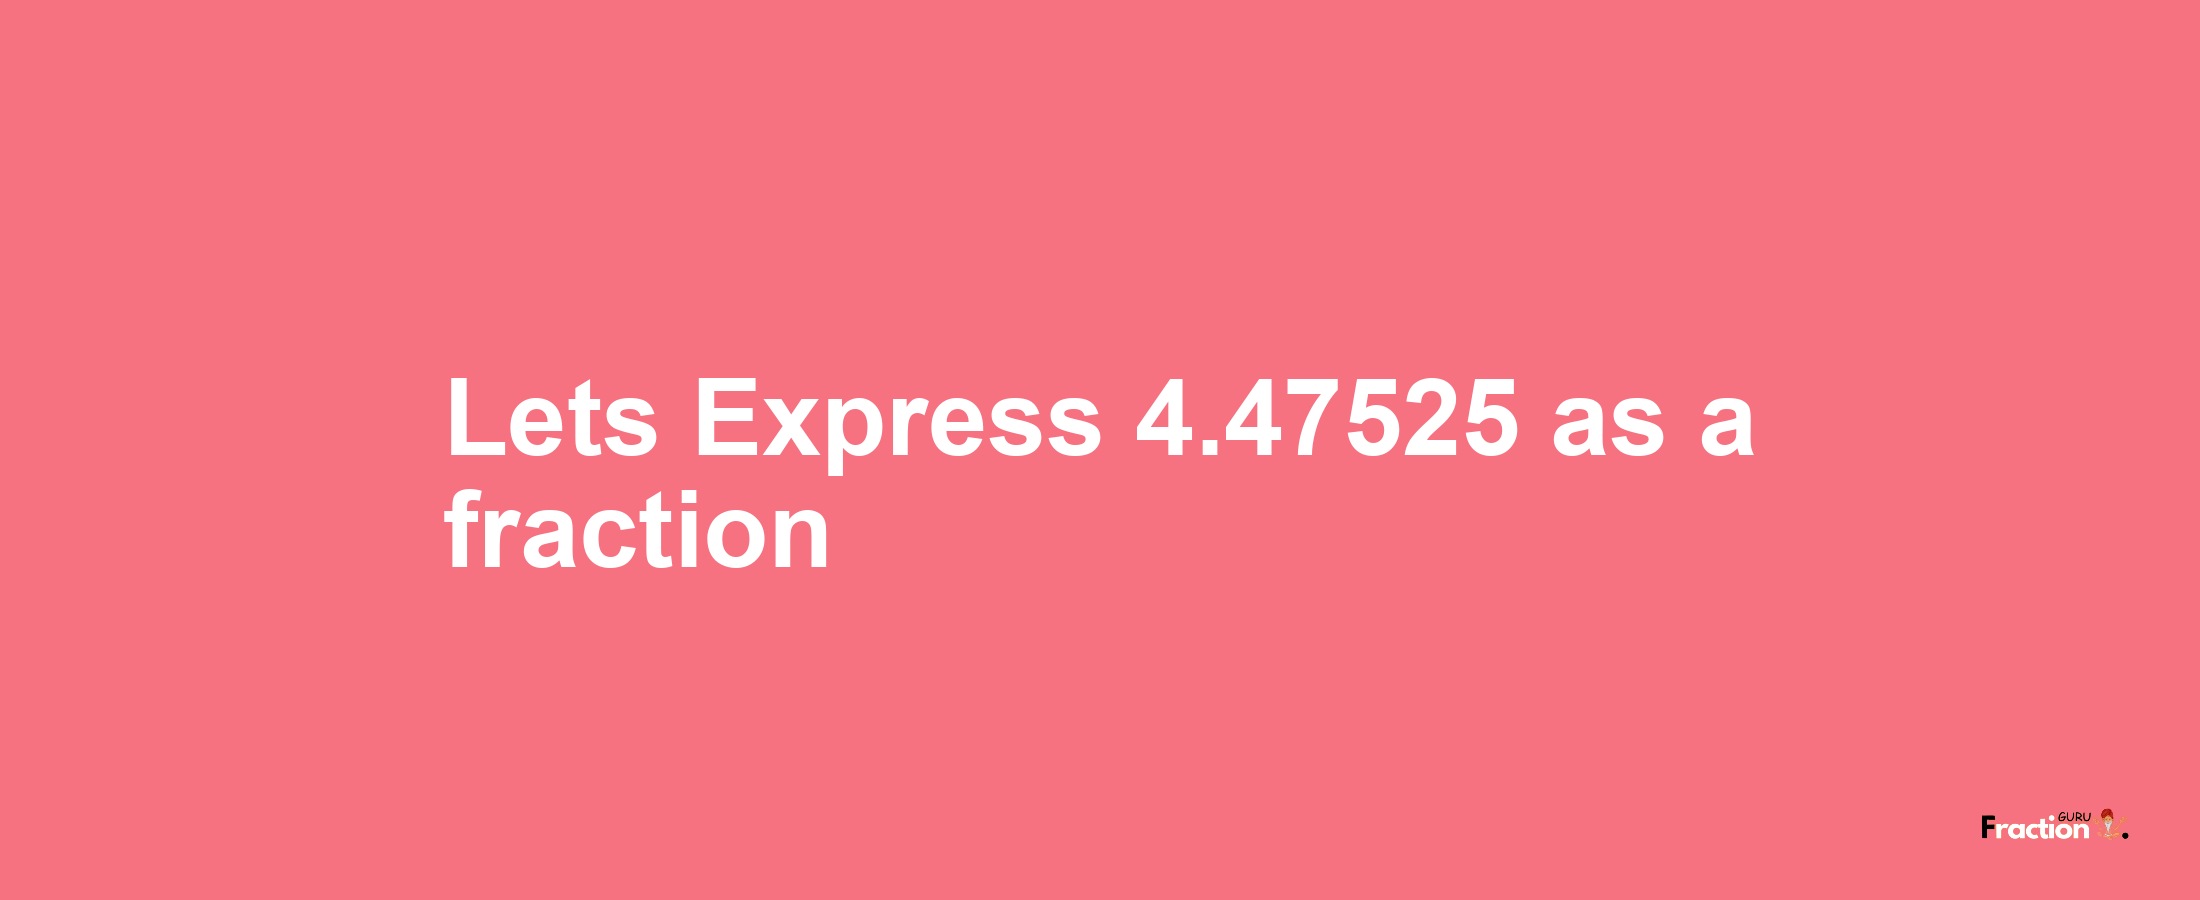 Lets Express 4.47525 as afraction